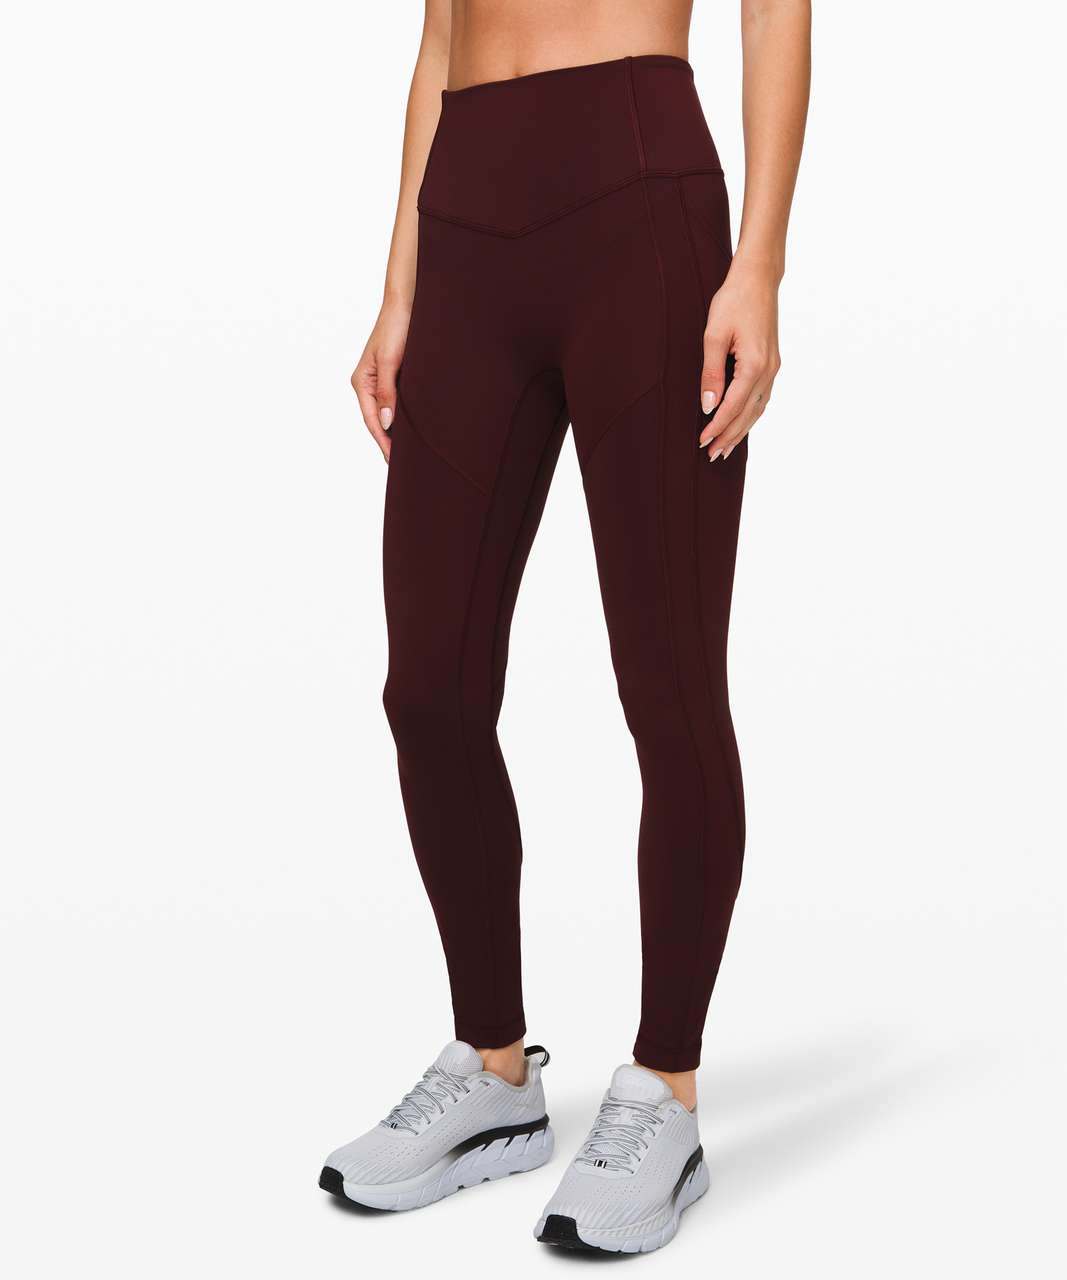 Lululemon All The Right Places Pant II 28" - Garnet